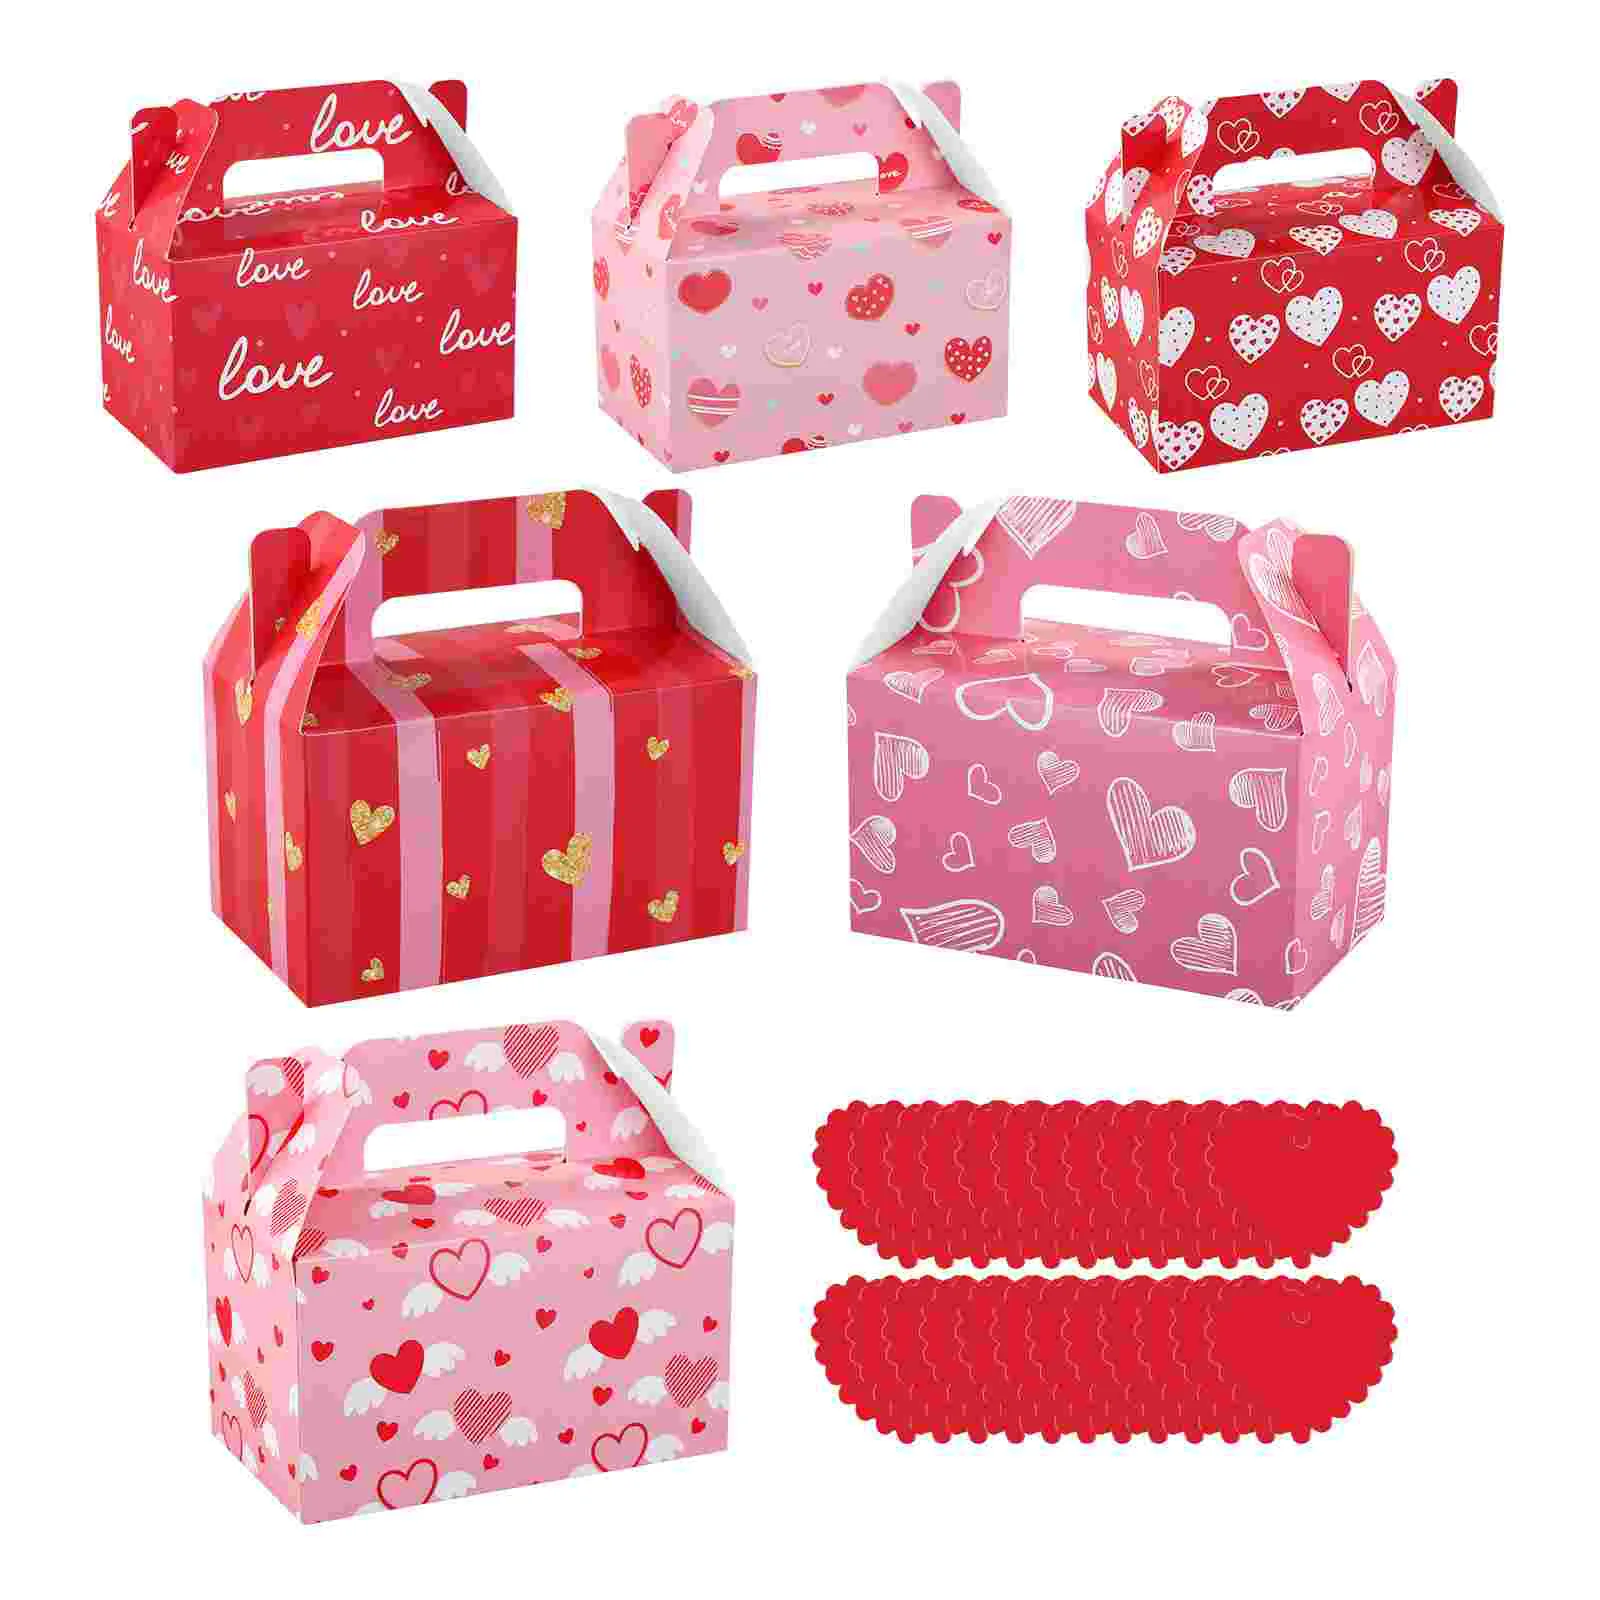 

Boxes Gift Party Box Treat Favor Candy Her Paper Holders Cookie Birthday Gifts Cardboard Decorations Hearts Goodie Heart Shaped